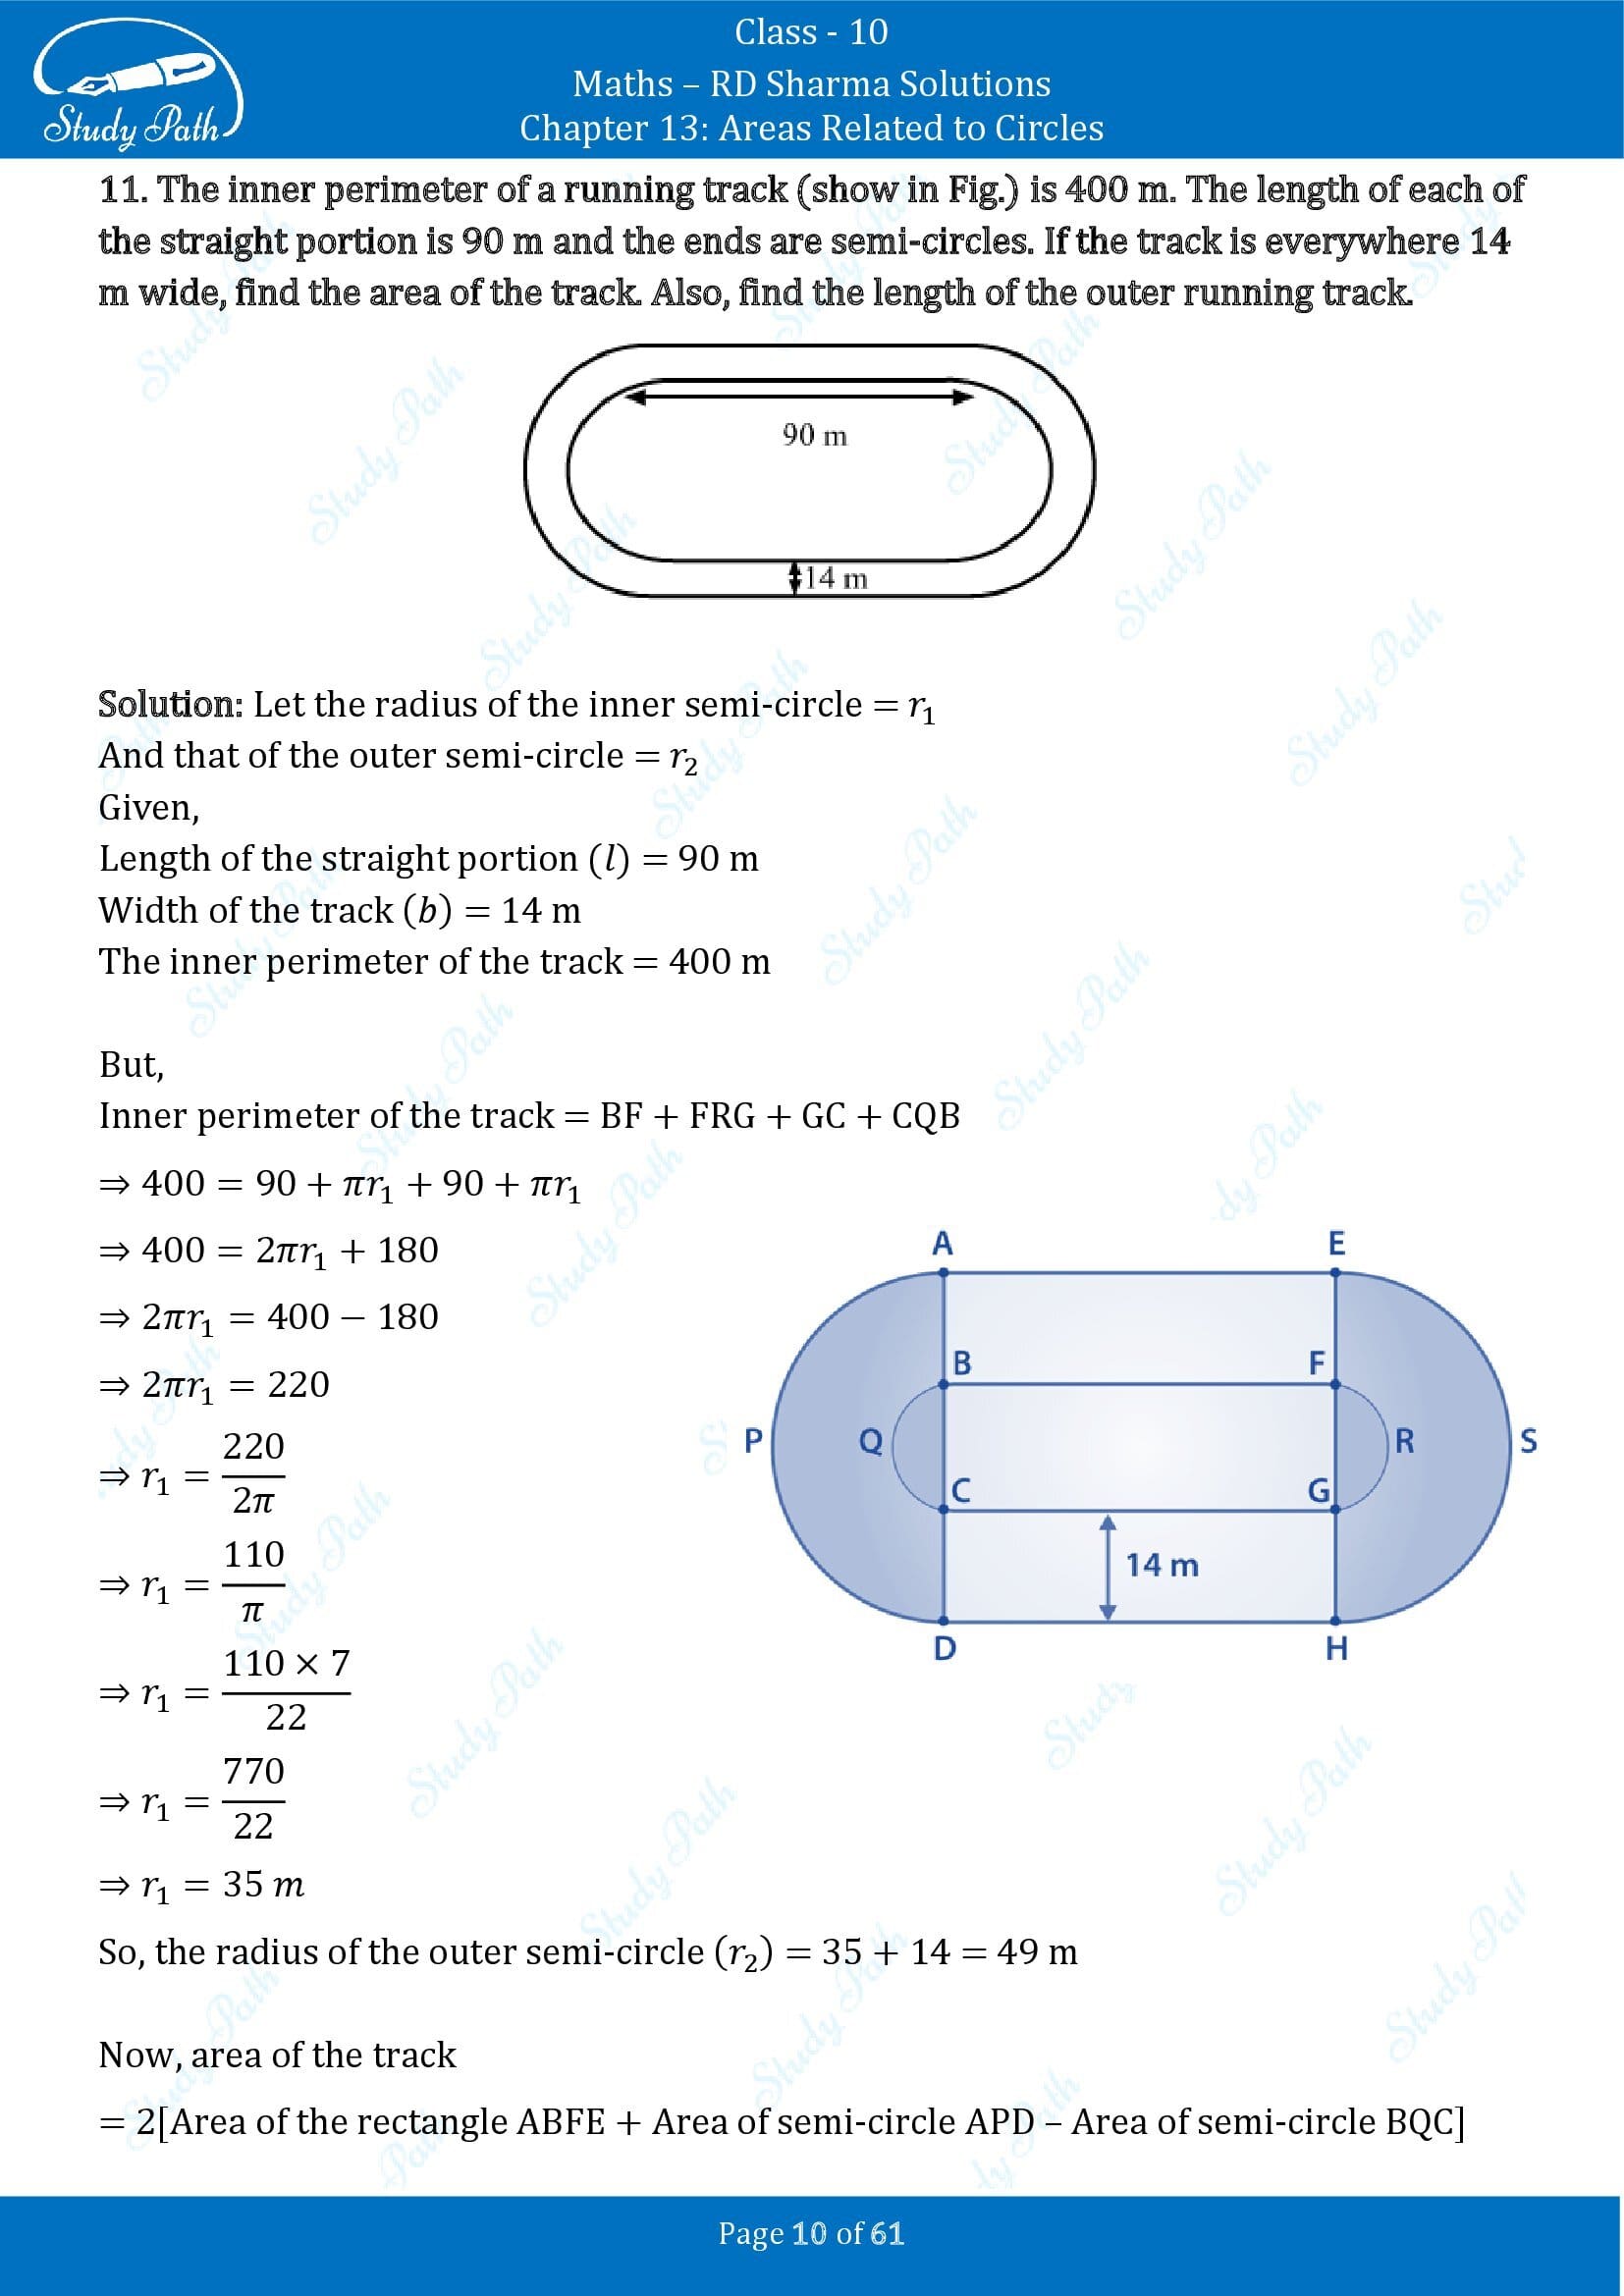 RD Sharma Solutions Class 10 Chapter 13 Areas Related to Circles Exercise 13.4 00010